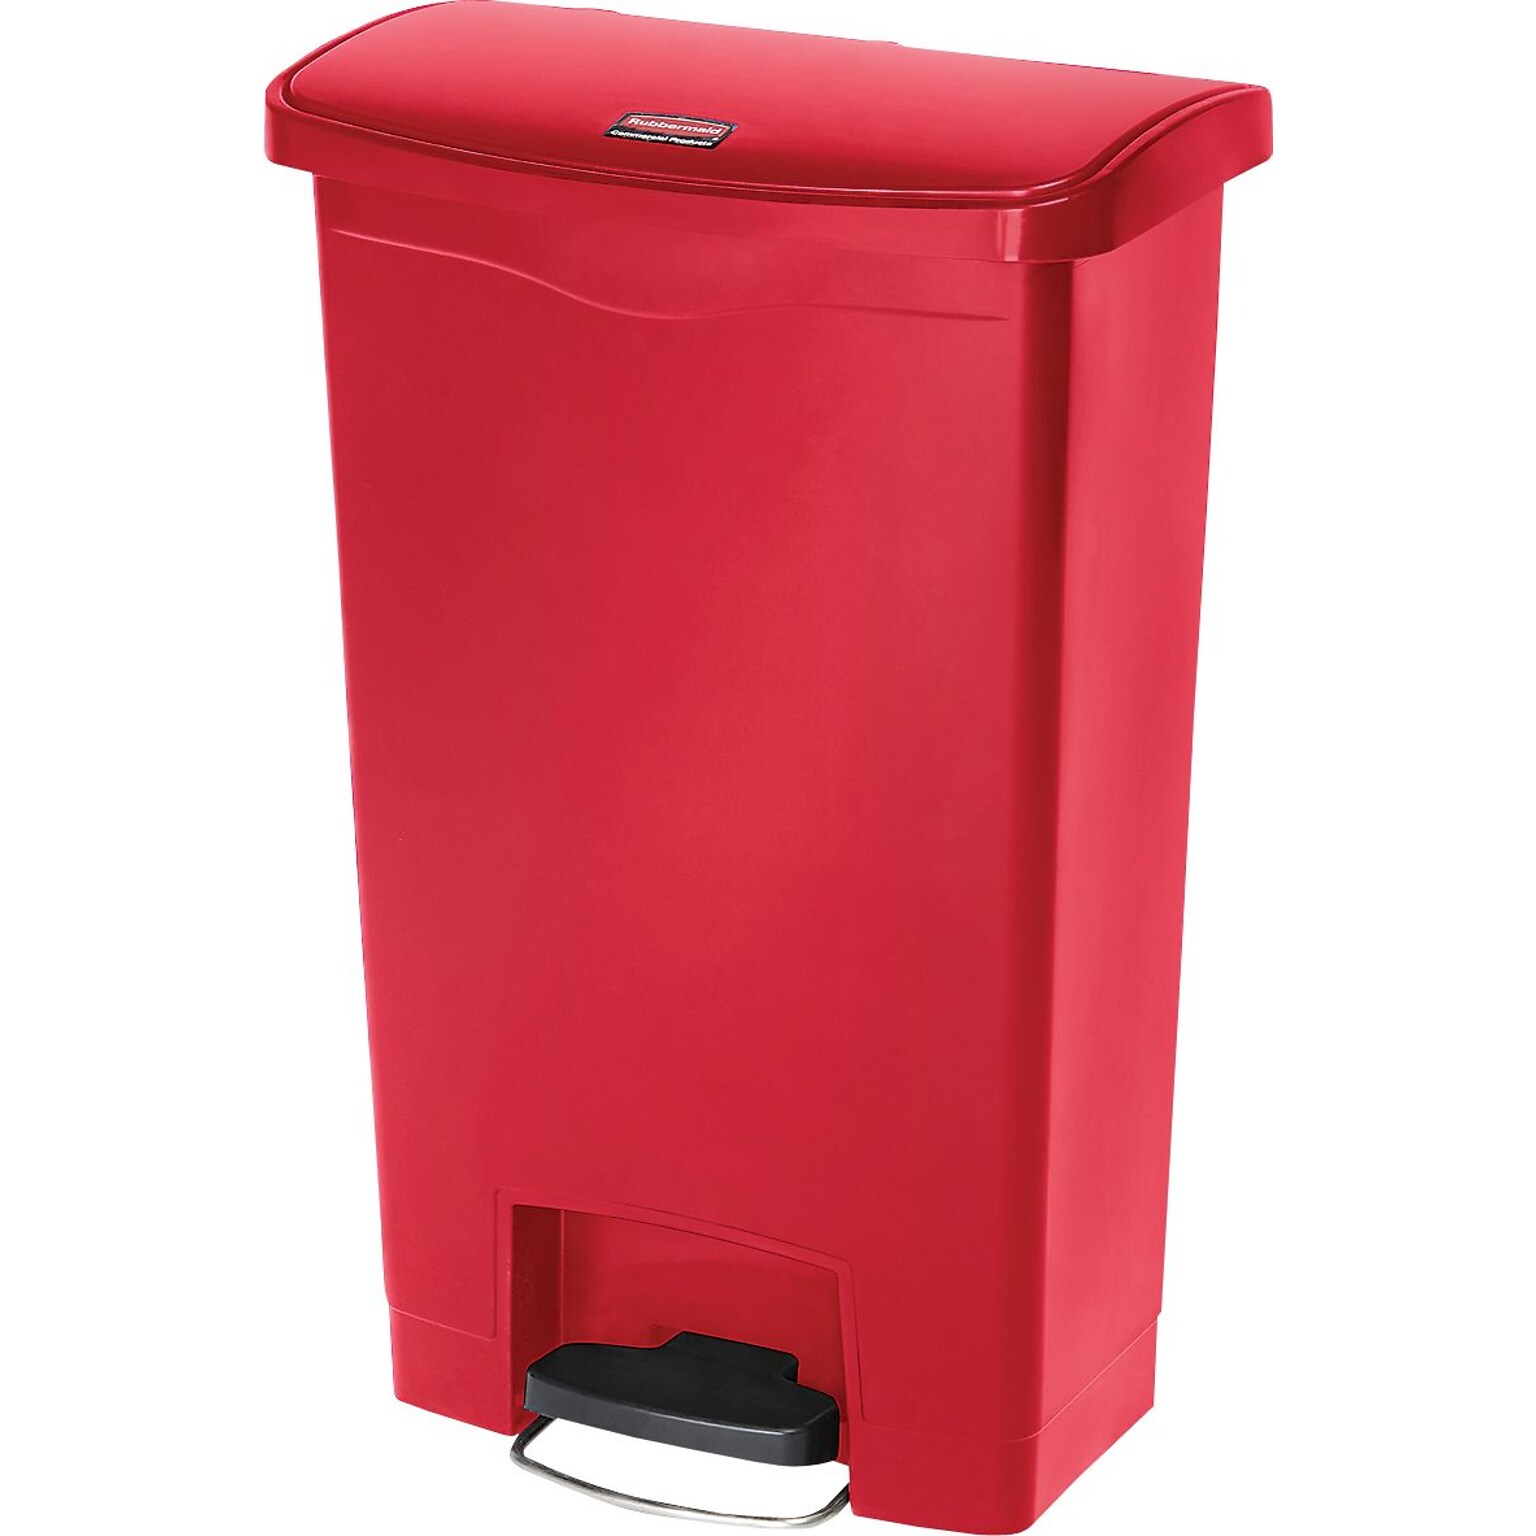 Rubbermaid Slim Jim Resin Front Step-On Trash Can, 13 Gallons, Red (1883566)